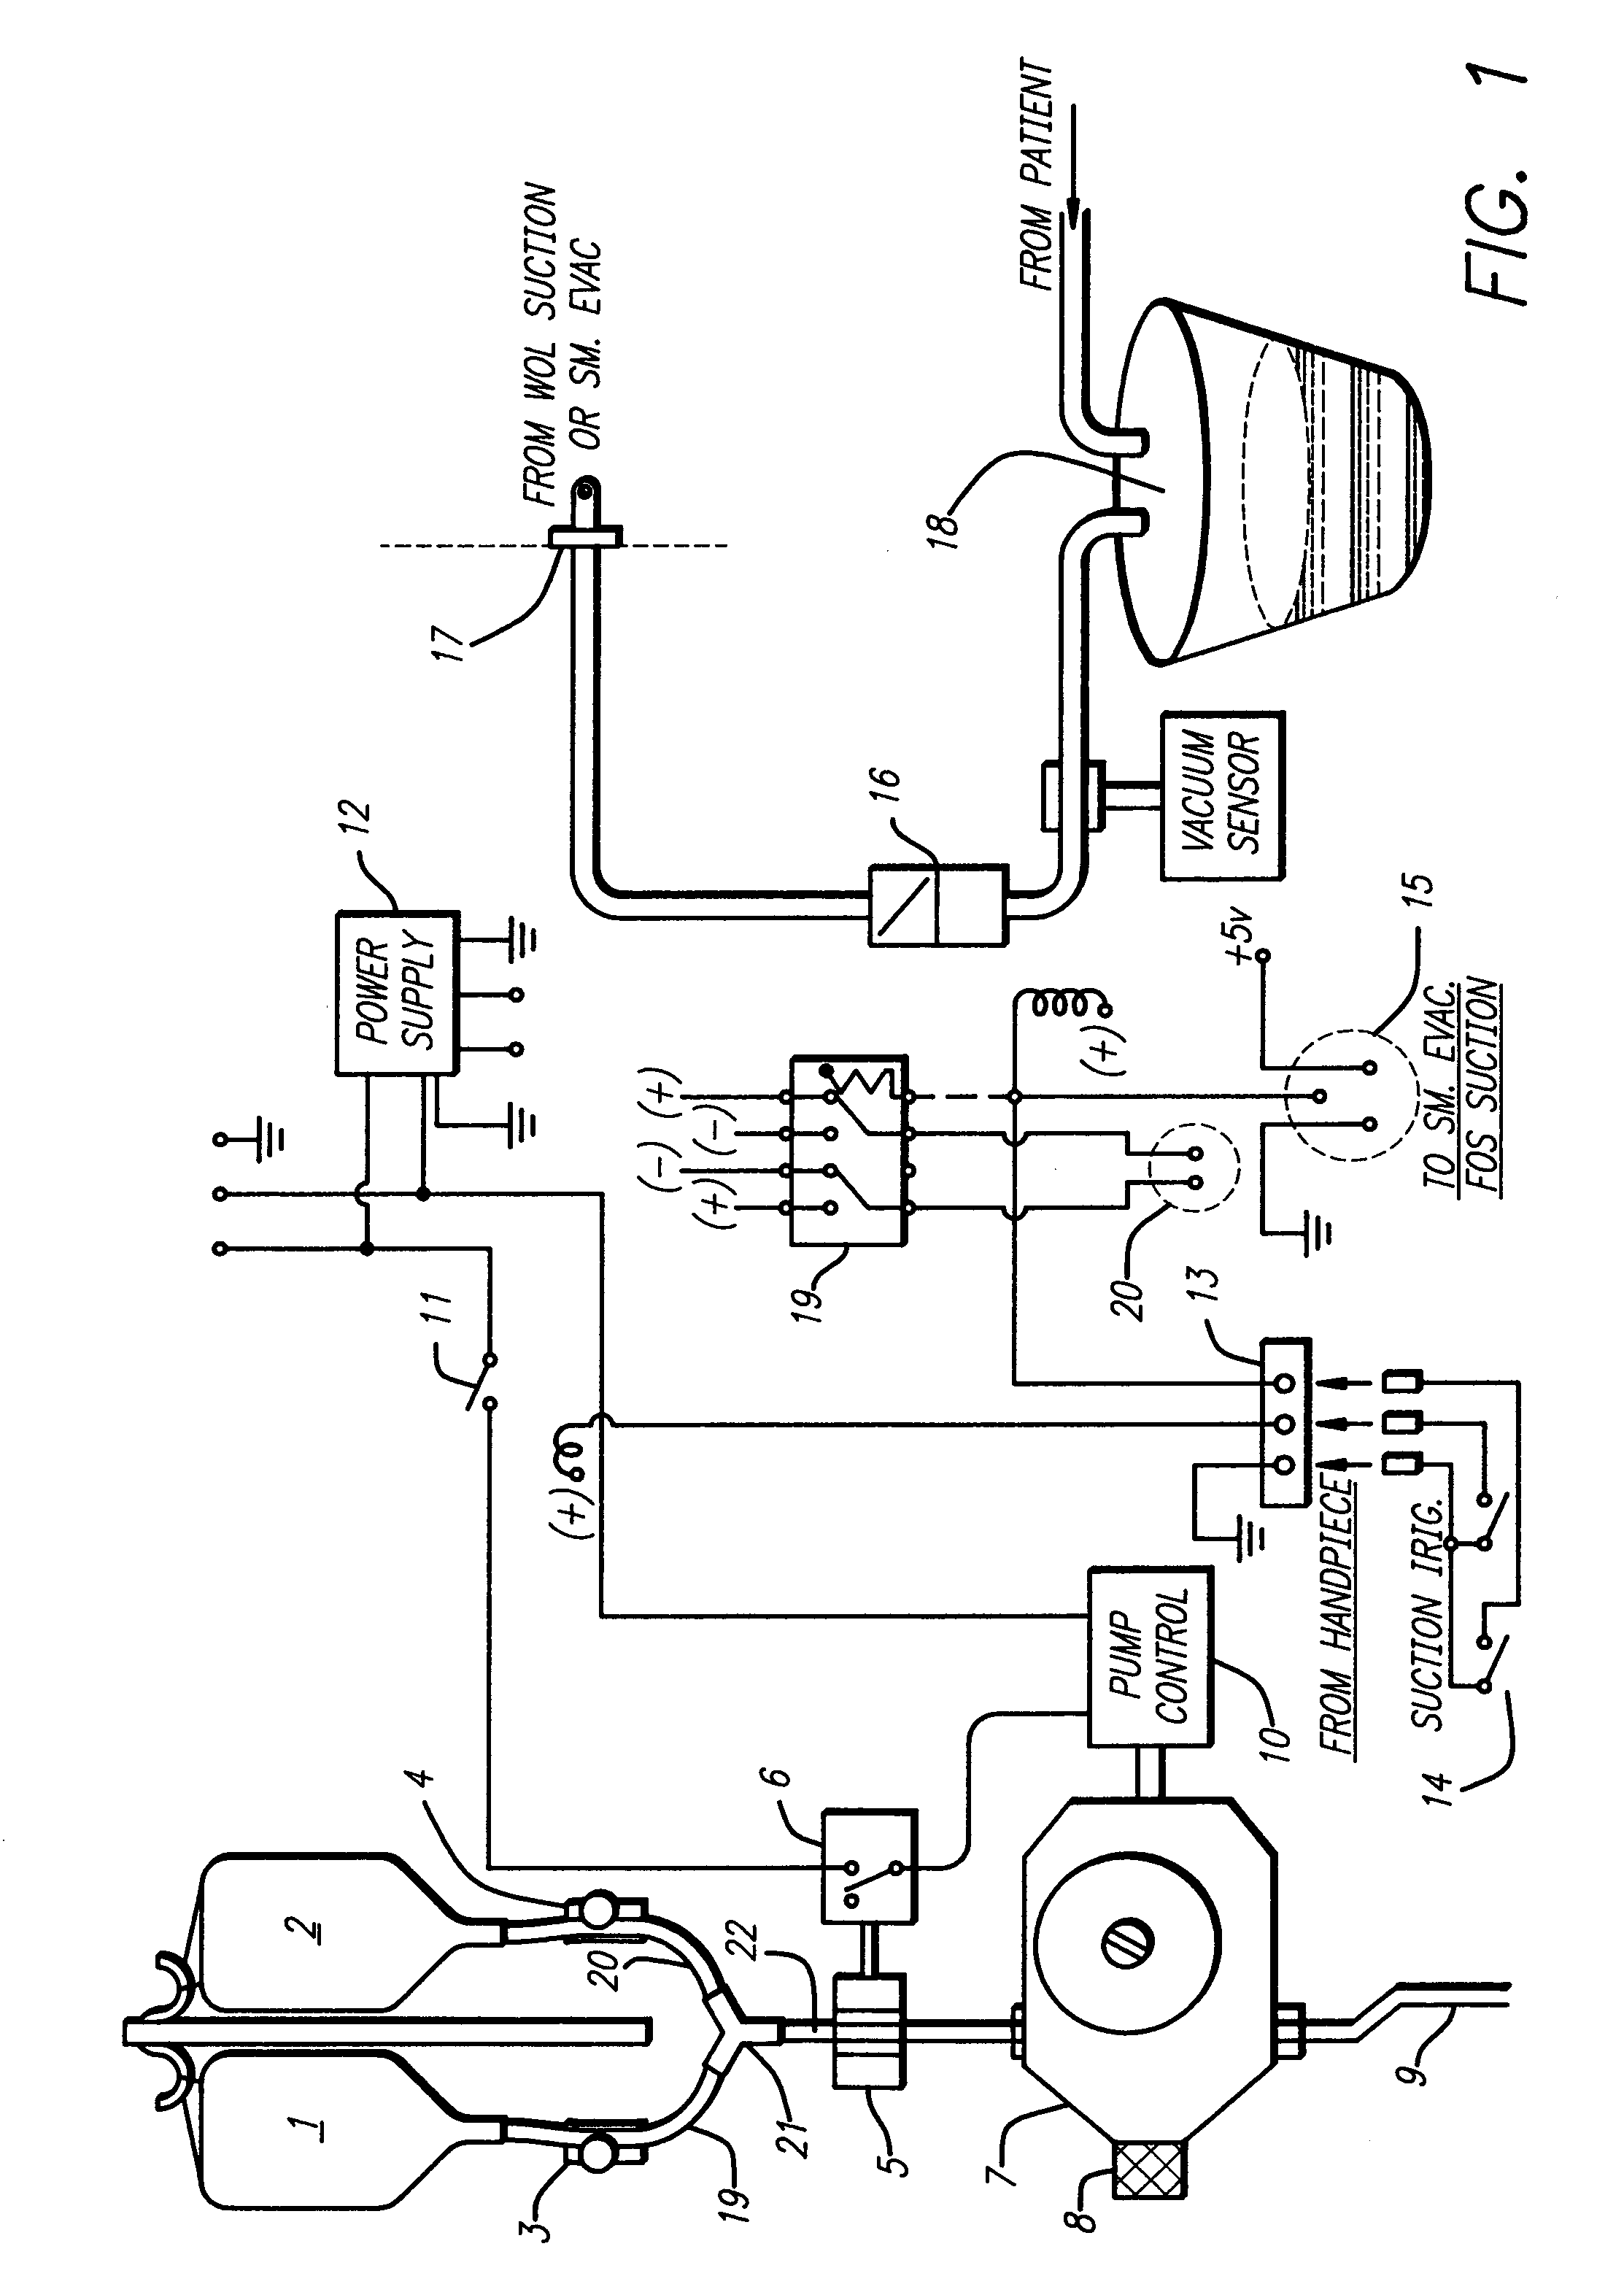 Automatic fluid control system for use in open and laparoscopic laser surgery and electrosurgery and method therefor